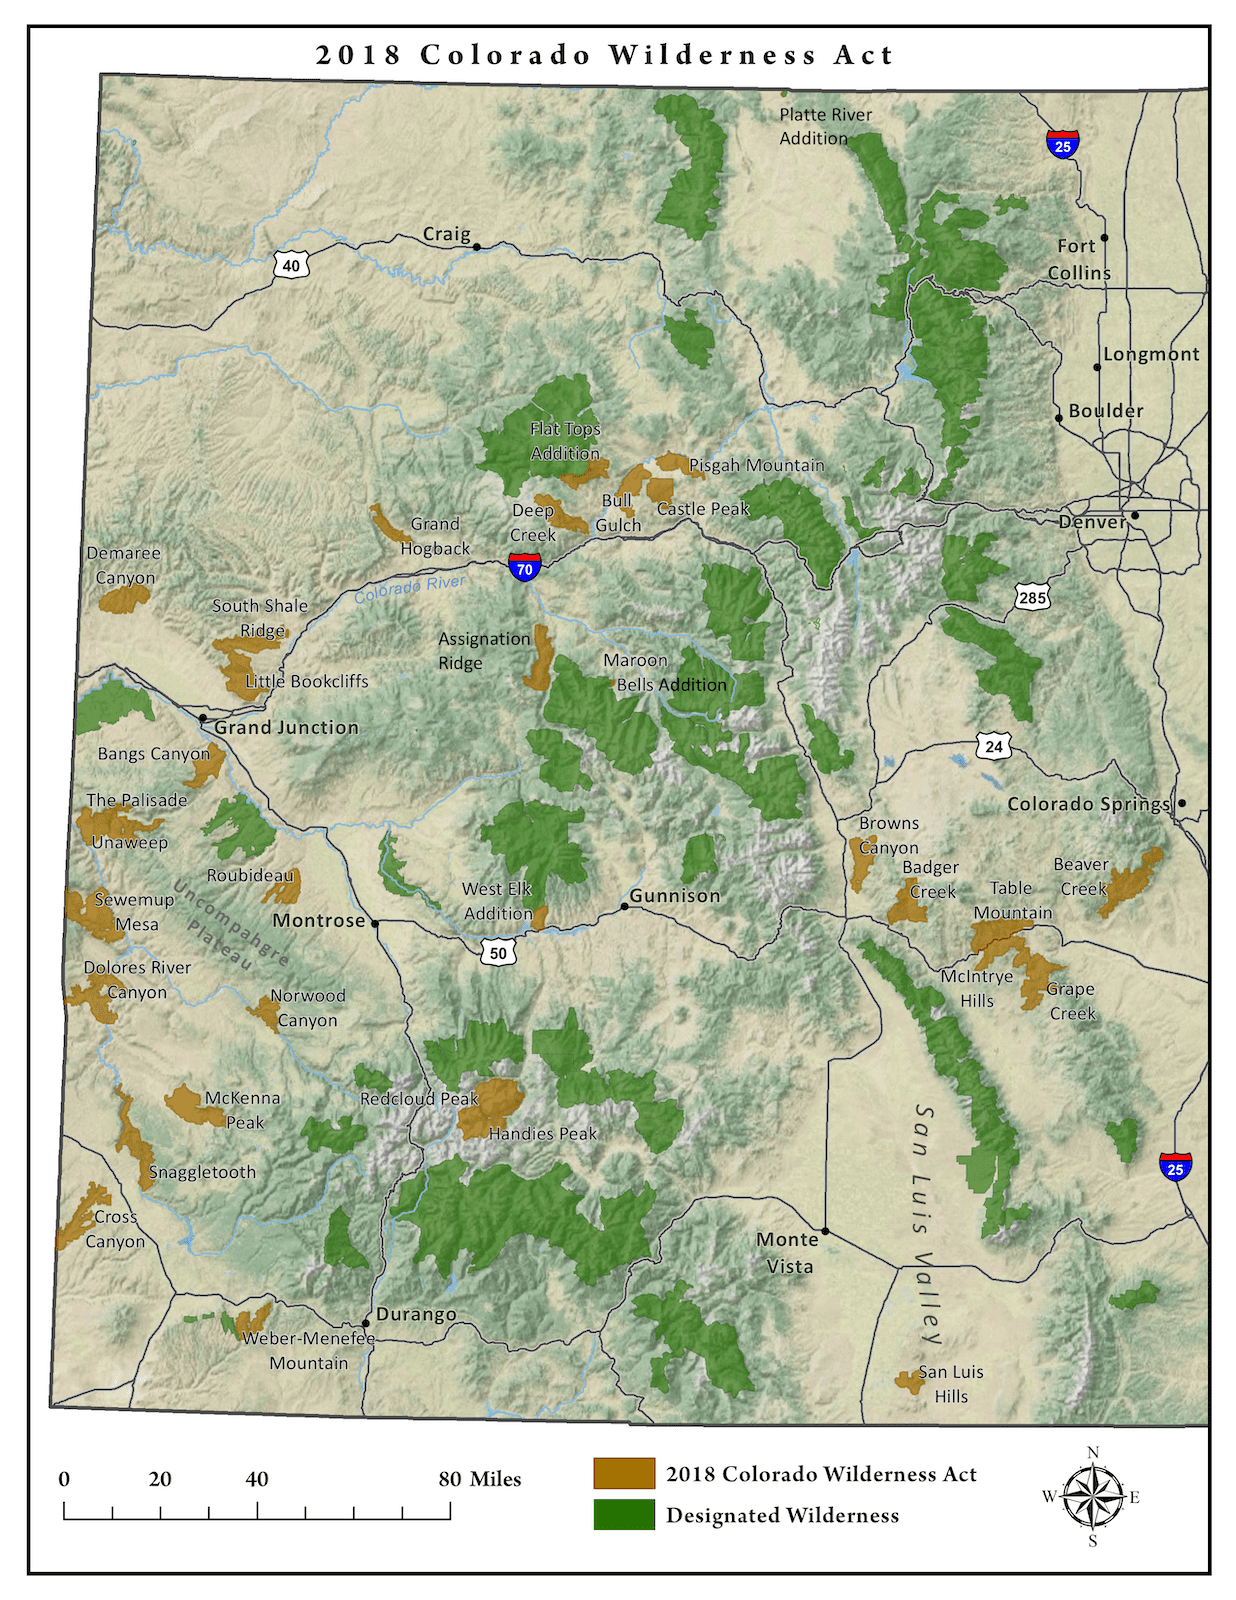 Colorado Wilderness Act Picture.png